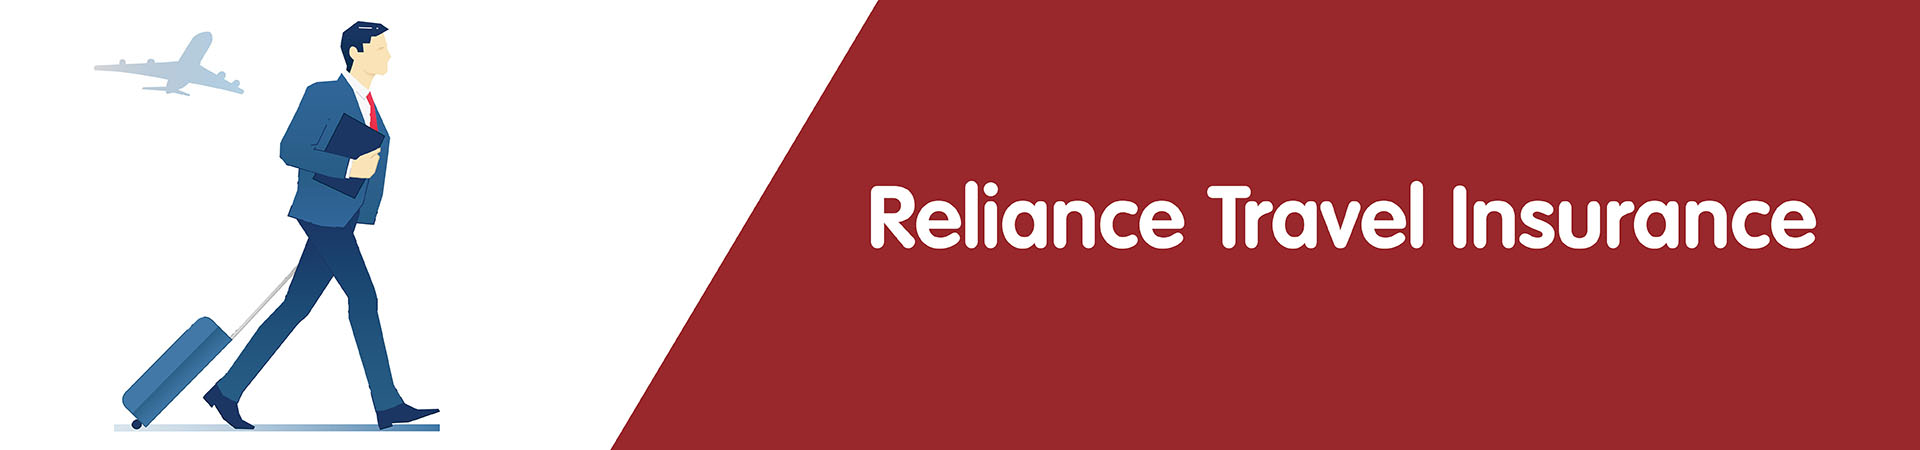 NRI - reliance travel insurance features